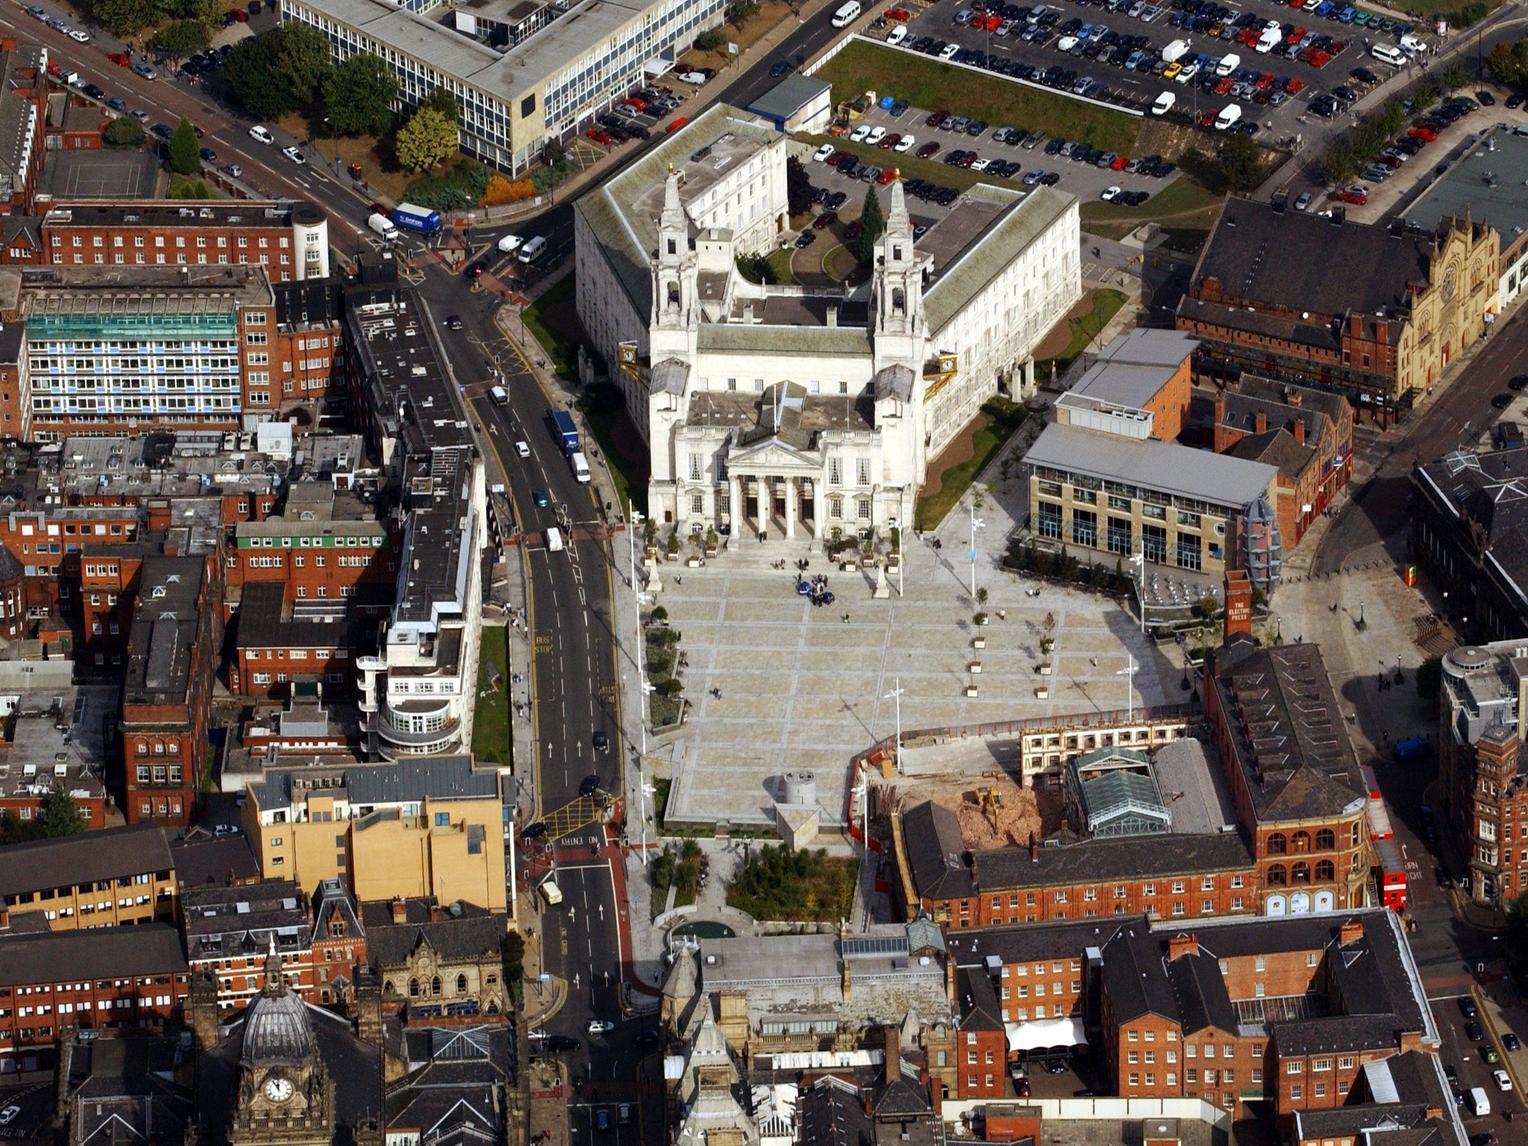 An easy one to start with... Leeds Civic Hall with Leeds General Infirmary on the left.